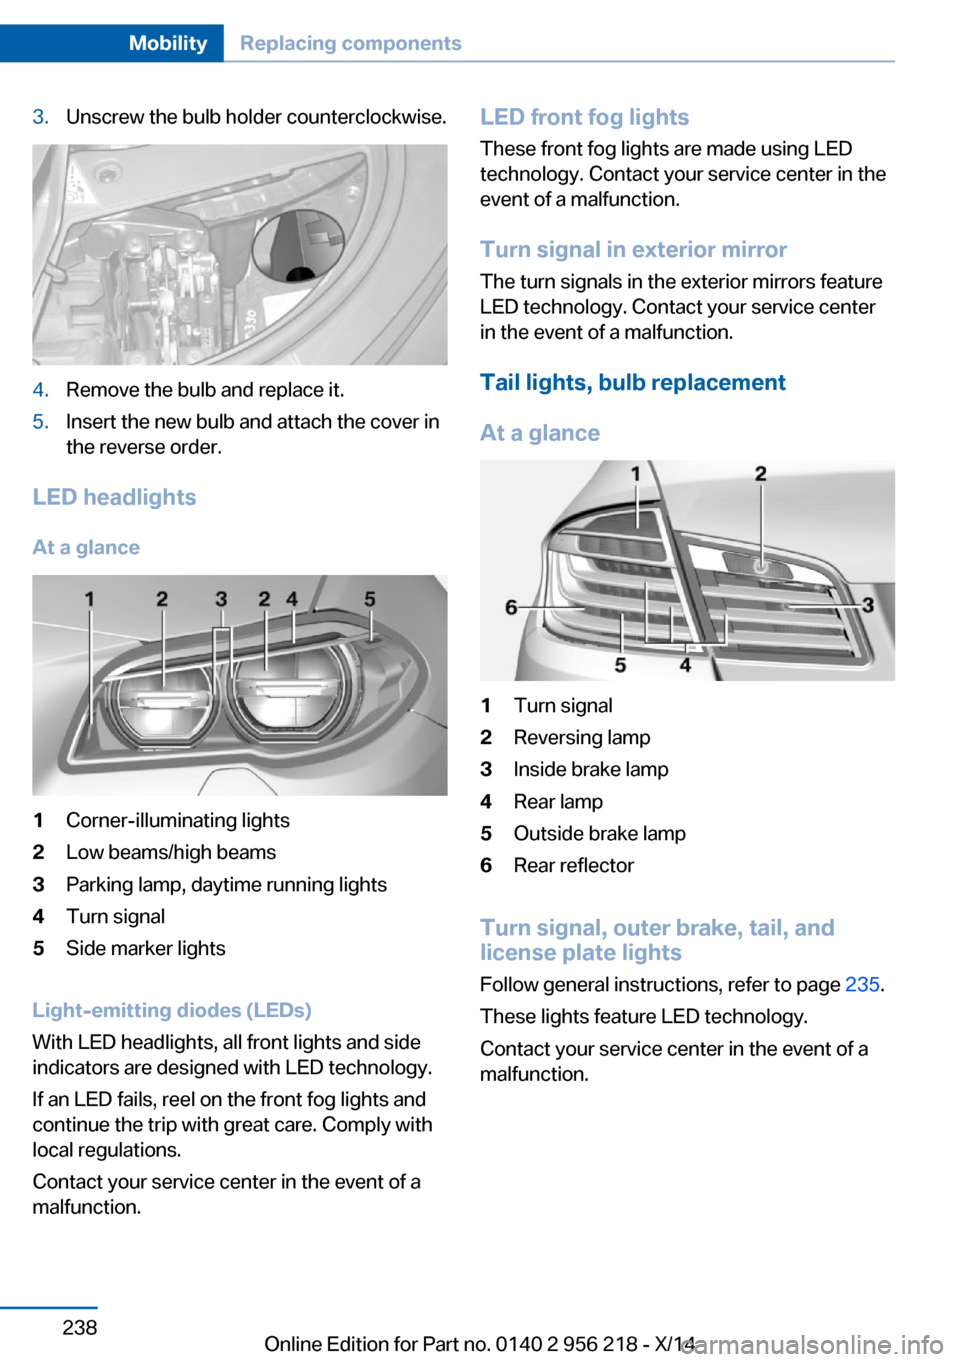 BMW 5 SERIES 2014 F10 Owners Manual 3.Unscrew the bulb holder counterclockwise.4.Remove the bulb and replace it.5.Insert the new bulb and attach the cover in
the reverse order.
LED headlights
At a glance
1Corner-illuminating lights2Low 